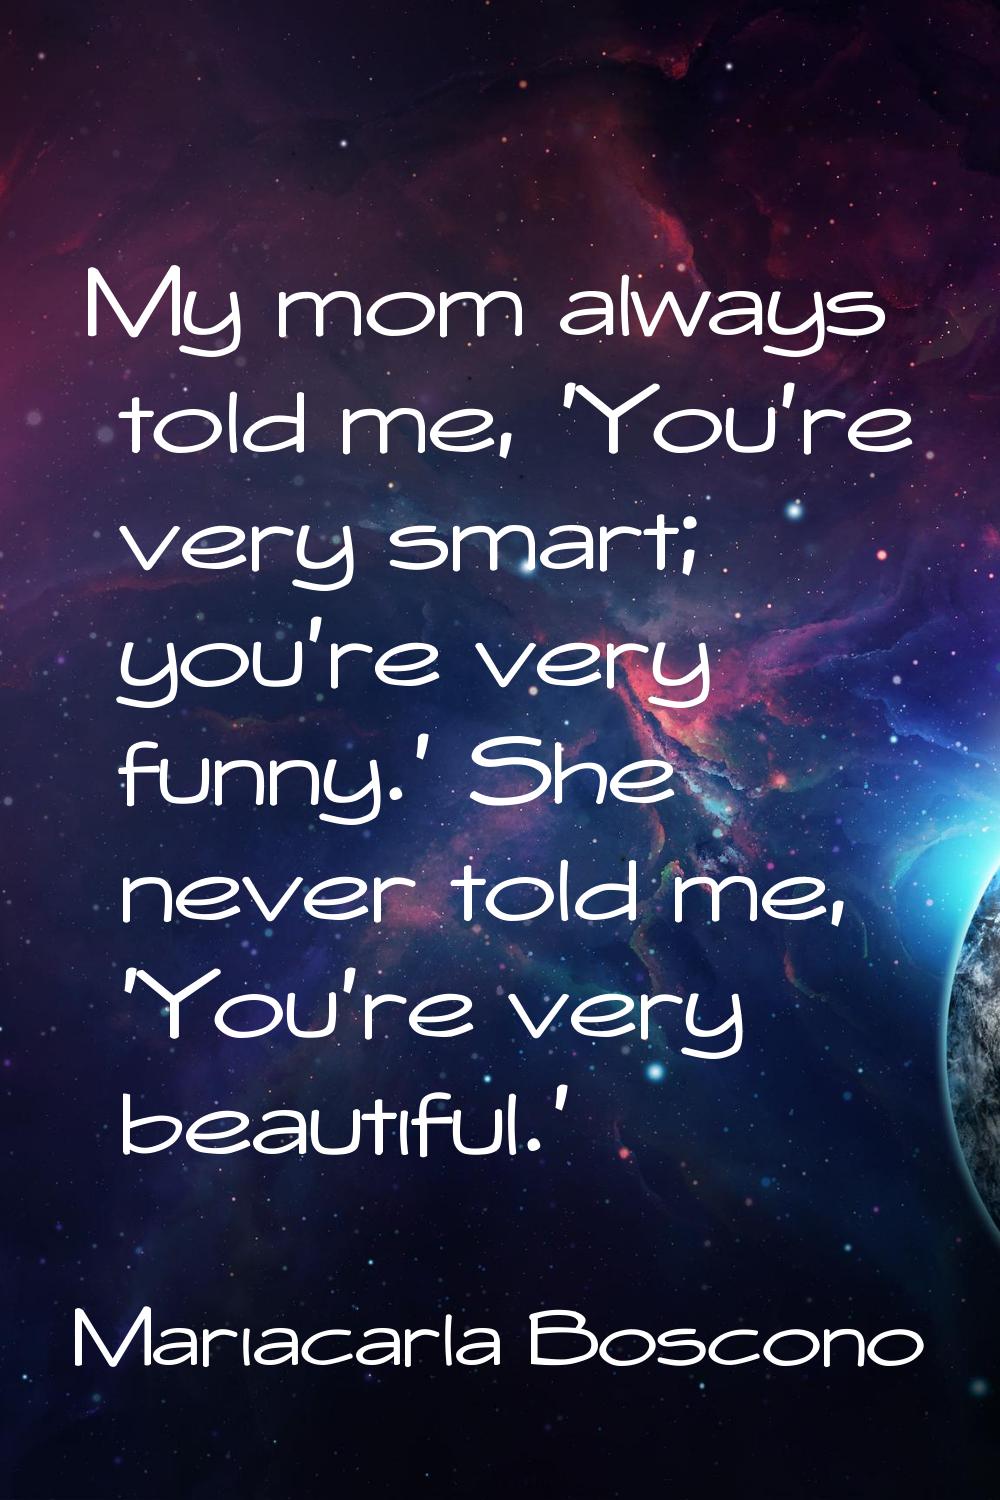 My mom always told me, 'You're very smart; you're very funny.' She never told me, 'You're very beau